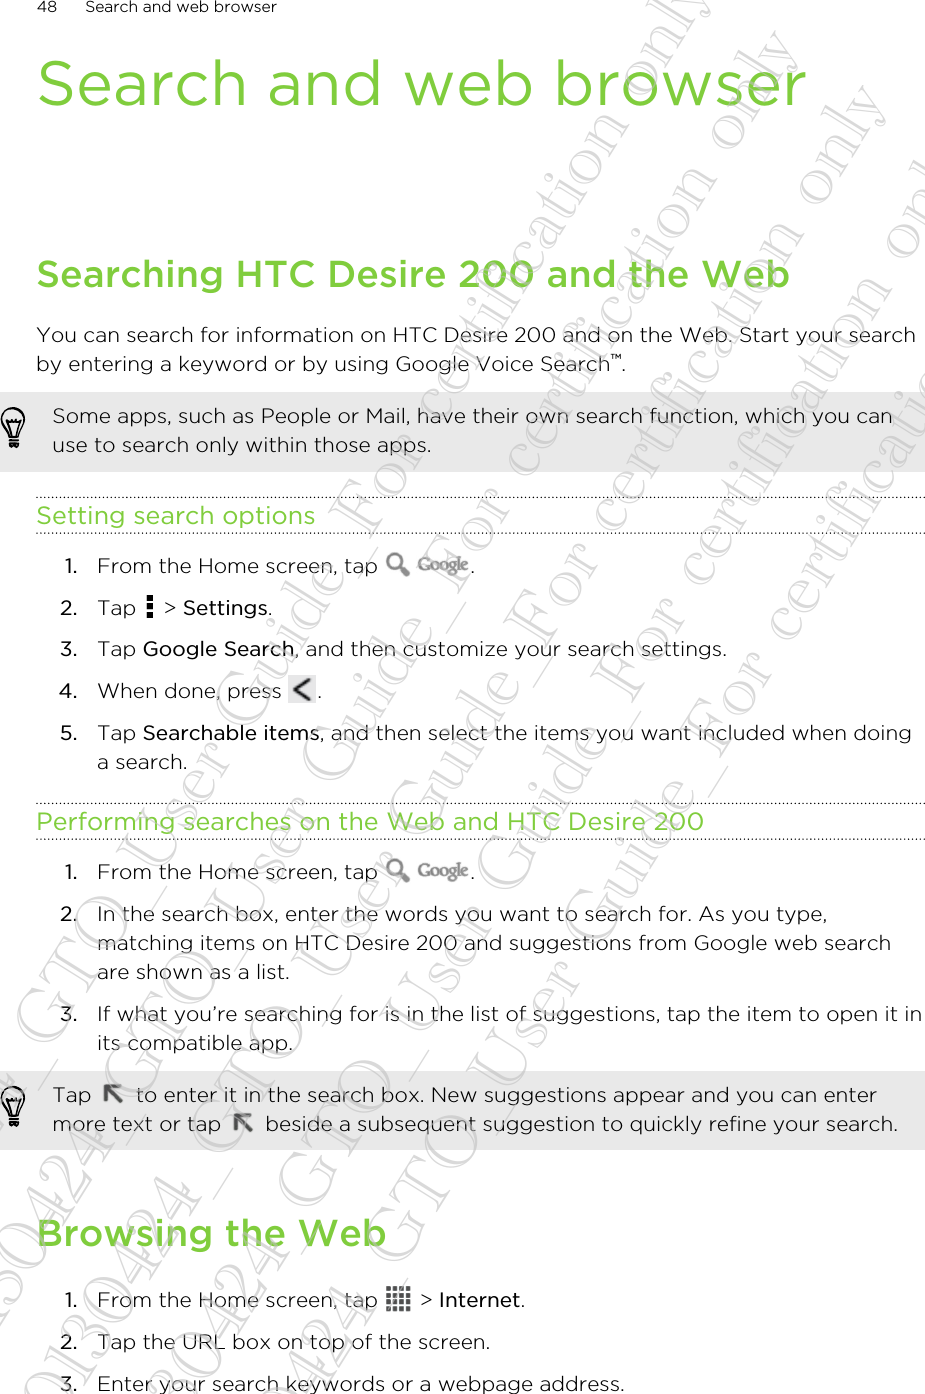 Search and web browserSearching HTC Desire 200 and the WebYou can search for information on HTC Desire 200 and on the Web. Start your searchby entering a keyword or by using Google Voice Search™.Some apps, such as People or Mail, have their own search function, which you canuse to search only within those apps.Setting search options1. From the Home screen, tap  .2. Tap   &gt; Settings.3. Tap Google Search, and then customize your search settings.4. When done, press  .5. Tap Searchable items, and then select the items you want included when doinga search.Performing searches on the Web and HTC Desire 2001. From the Home screen, tap  .2. In the search box, enter the words you want to search for. As you type,matching items on HTC Desire 200 and suggestions from Google web searchare shown as a list.3. If what you’re searching for is in the list of suggestions, tap the item to open it inits compatible app. Tap   to enter it in the search box. New suggestions appear and you can entermore text or tap   beside a subsequent suggestion to quickly refine your search.Browsing the Web1. From the Home screen, tap   &gt; Internet.2. Tap the URL box on top of the screen.3. Enter your search keywords or a webpage address.48 Search and web browser20130424_GTO_User Guide_For certification only 20130424_GTO_User Guide_For certification only 20130424_GTO_User Guide_For certification only 20130424_GTO_User Guide_For certification only 20130424_GTO_User Guide_For certification only